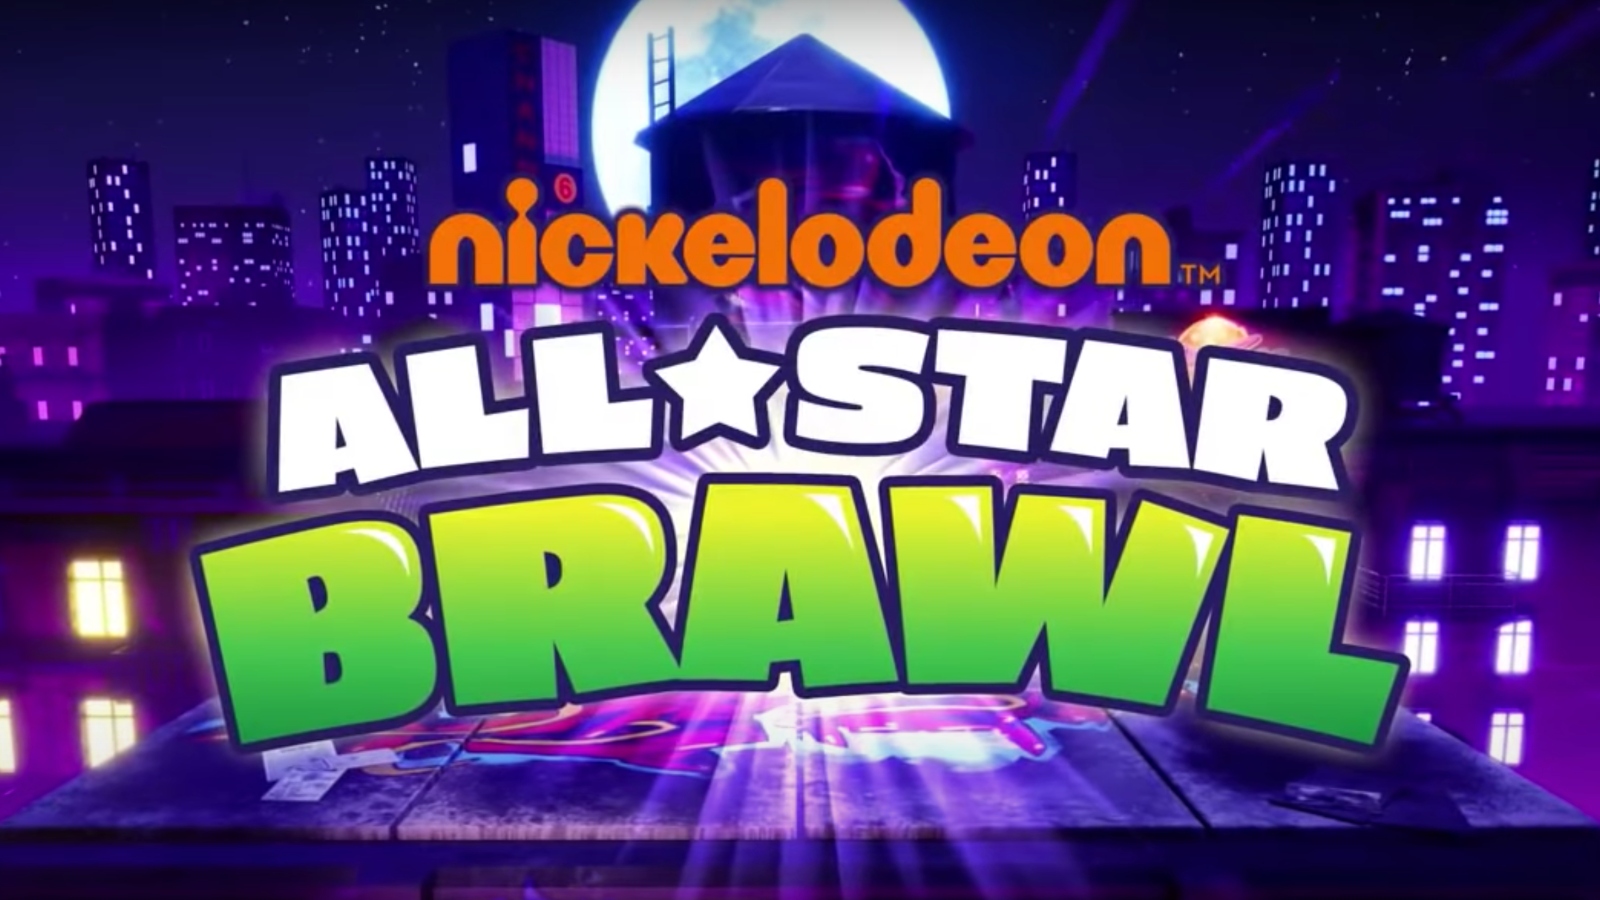 Nickelodeon All-Star Brawl Announced, To Release Later This Year